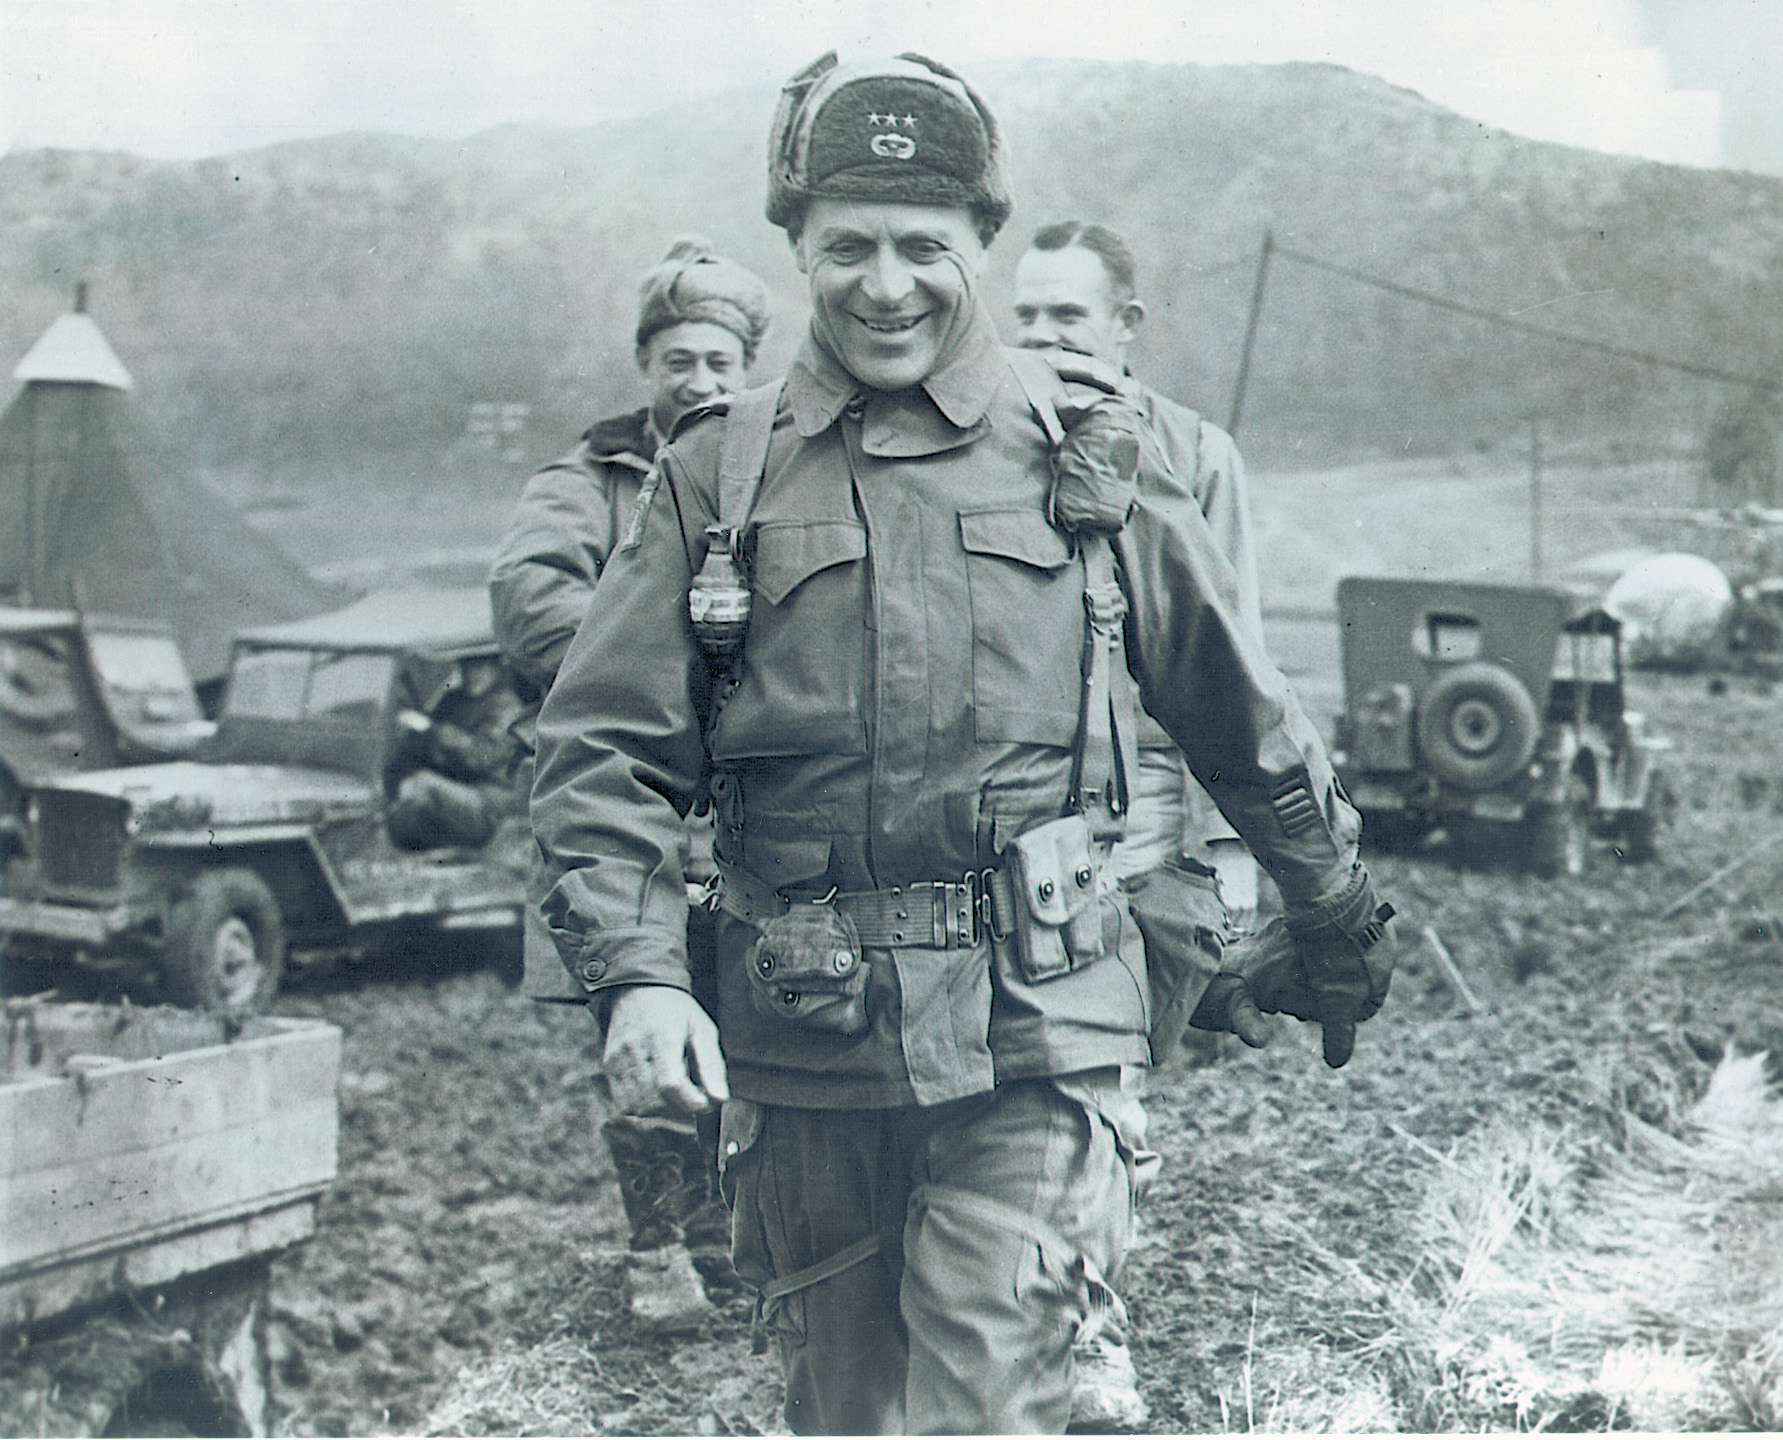 Lt. Gen. Matthew Ridgway visiting a Marine command post in the Wanju-Hoen sector of Korea in March 1951. His trademark grenade holds close to his shoulder. 